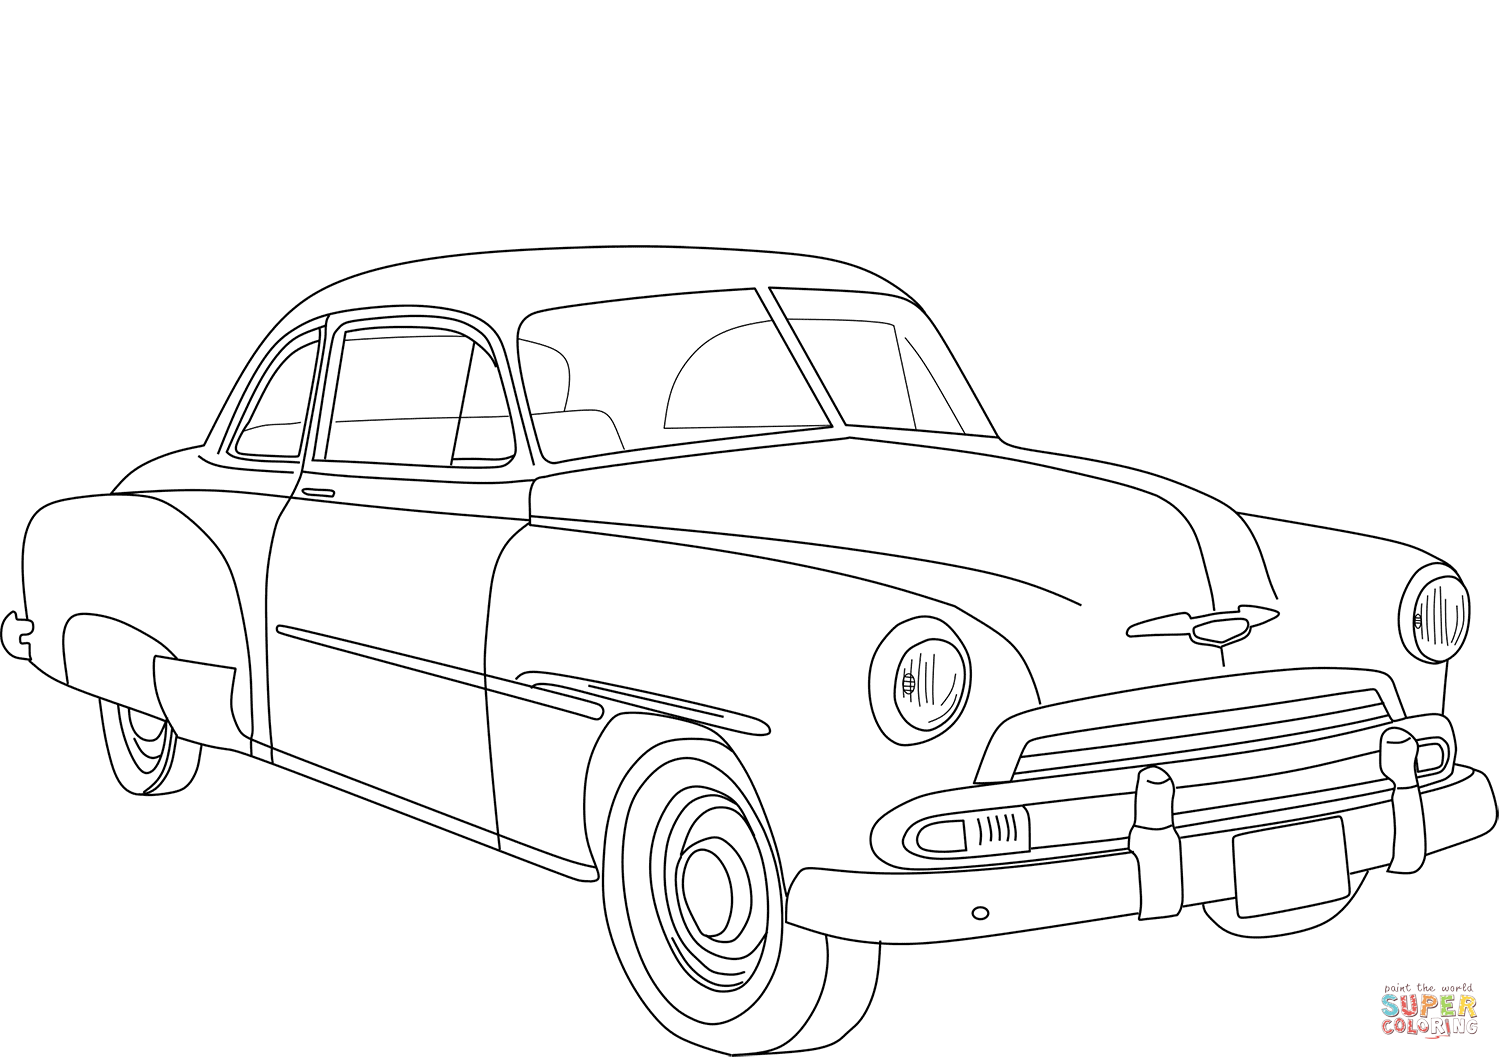 1951 Chevrolet Deluxe Coupe Coloring Page | Free Printable